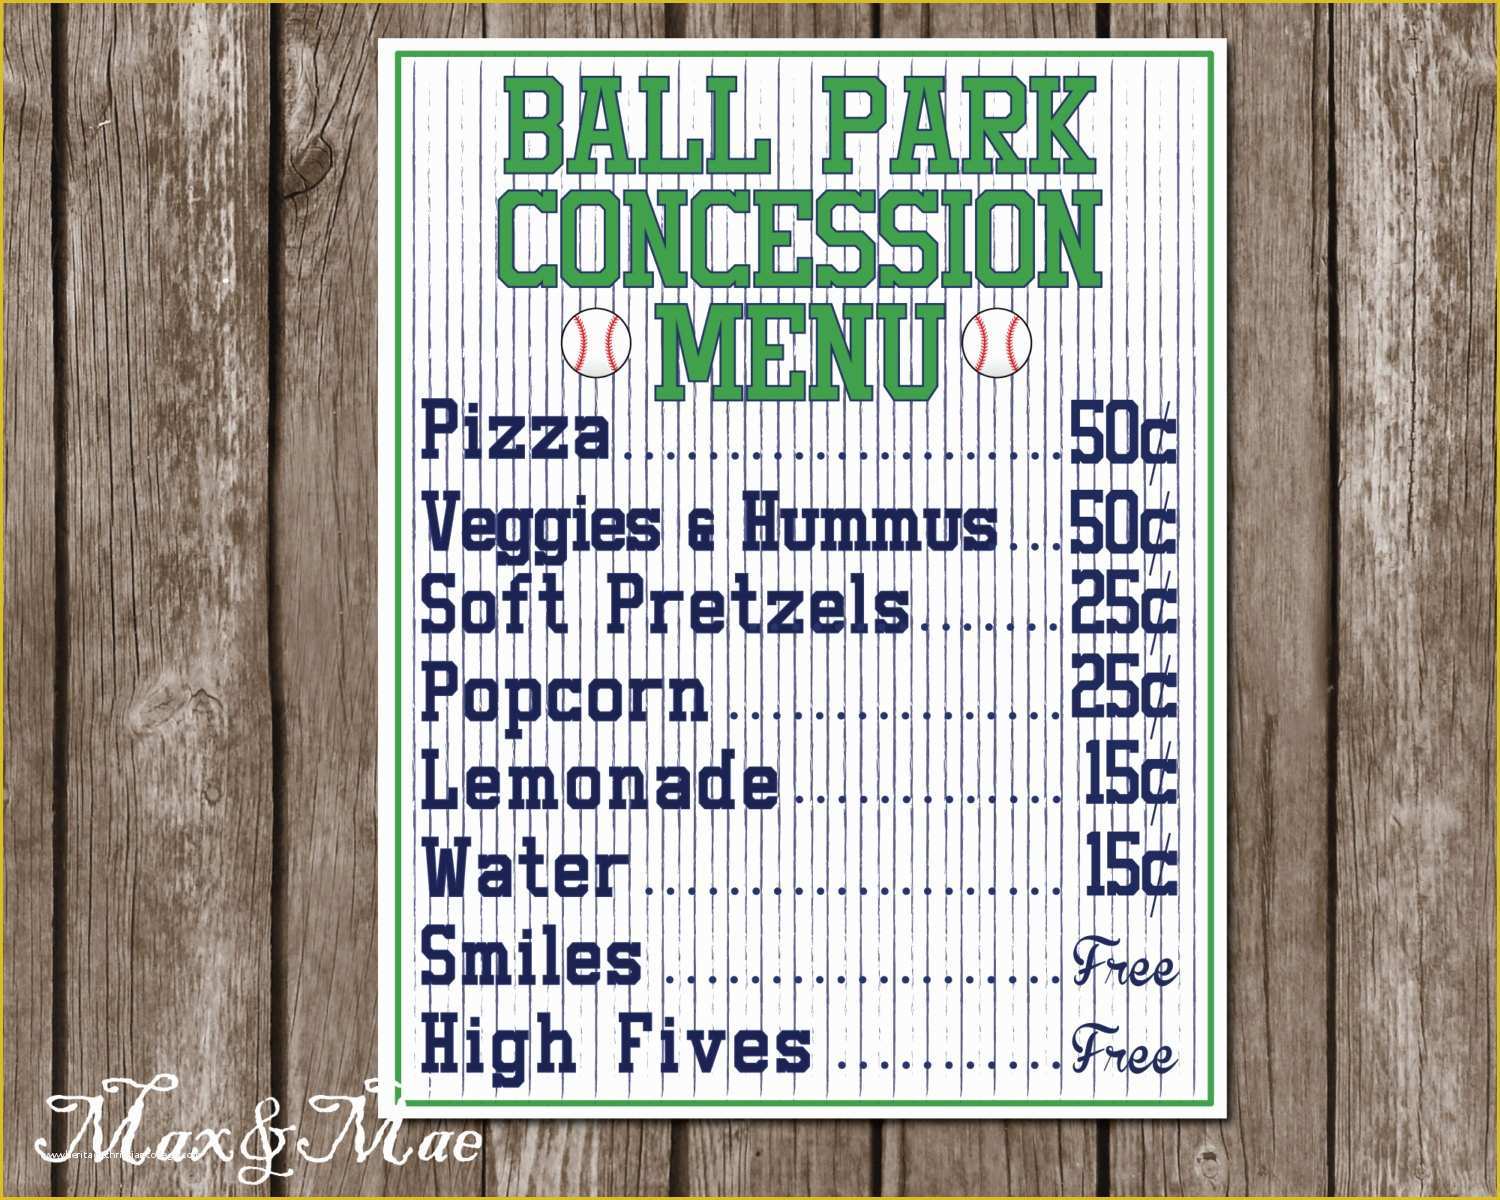 Concession Stand Menu Template Free Of Sports Concession Menu Baseball theme Baseball Party Decor